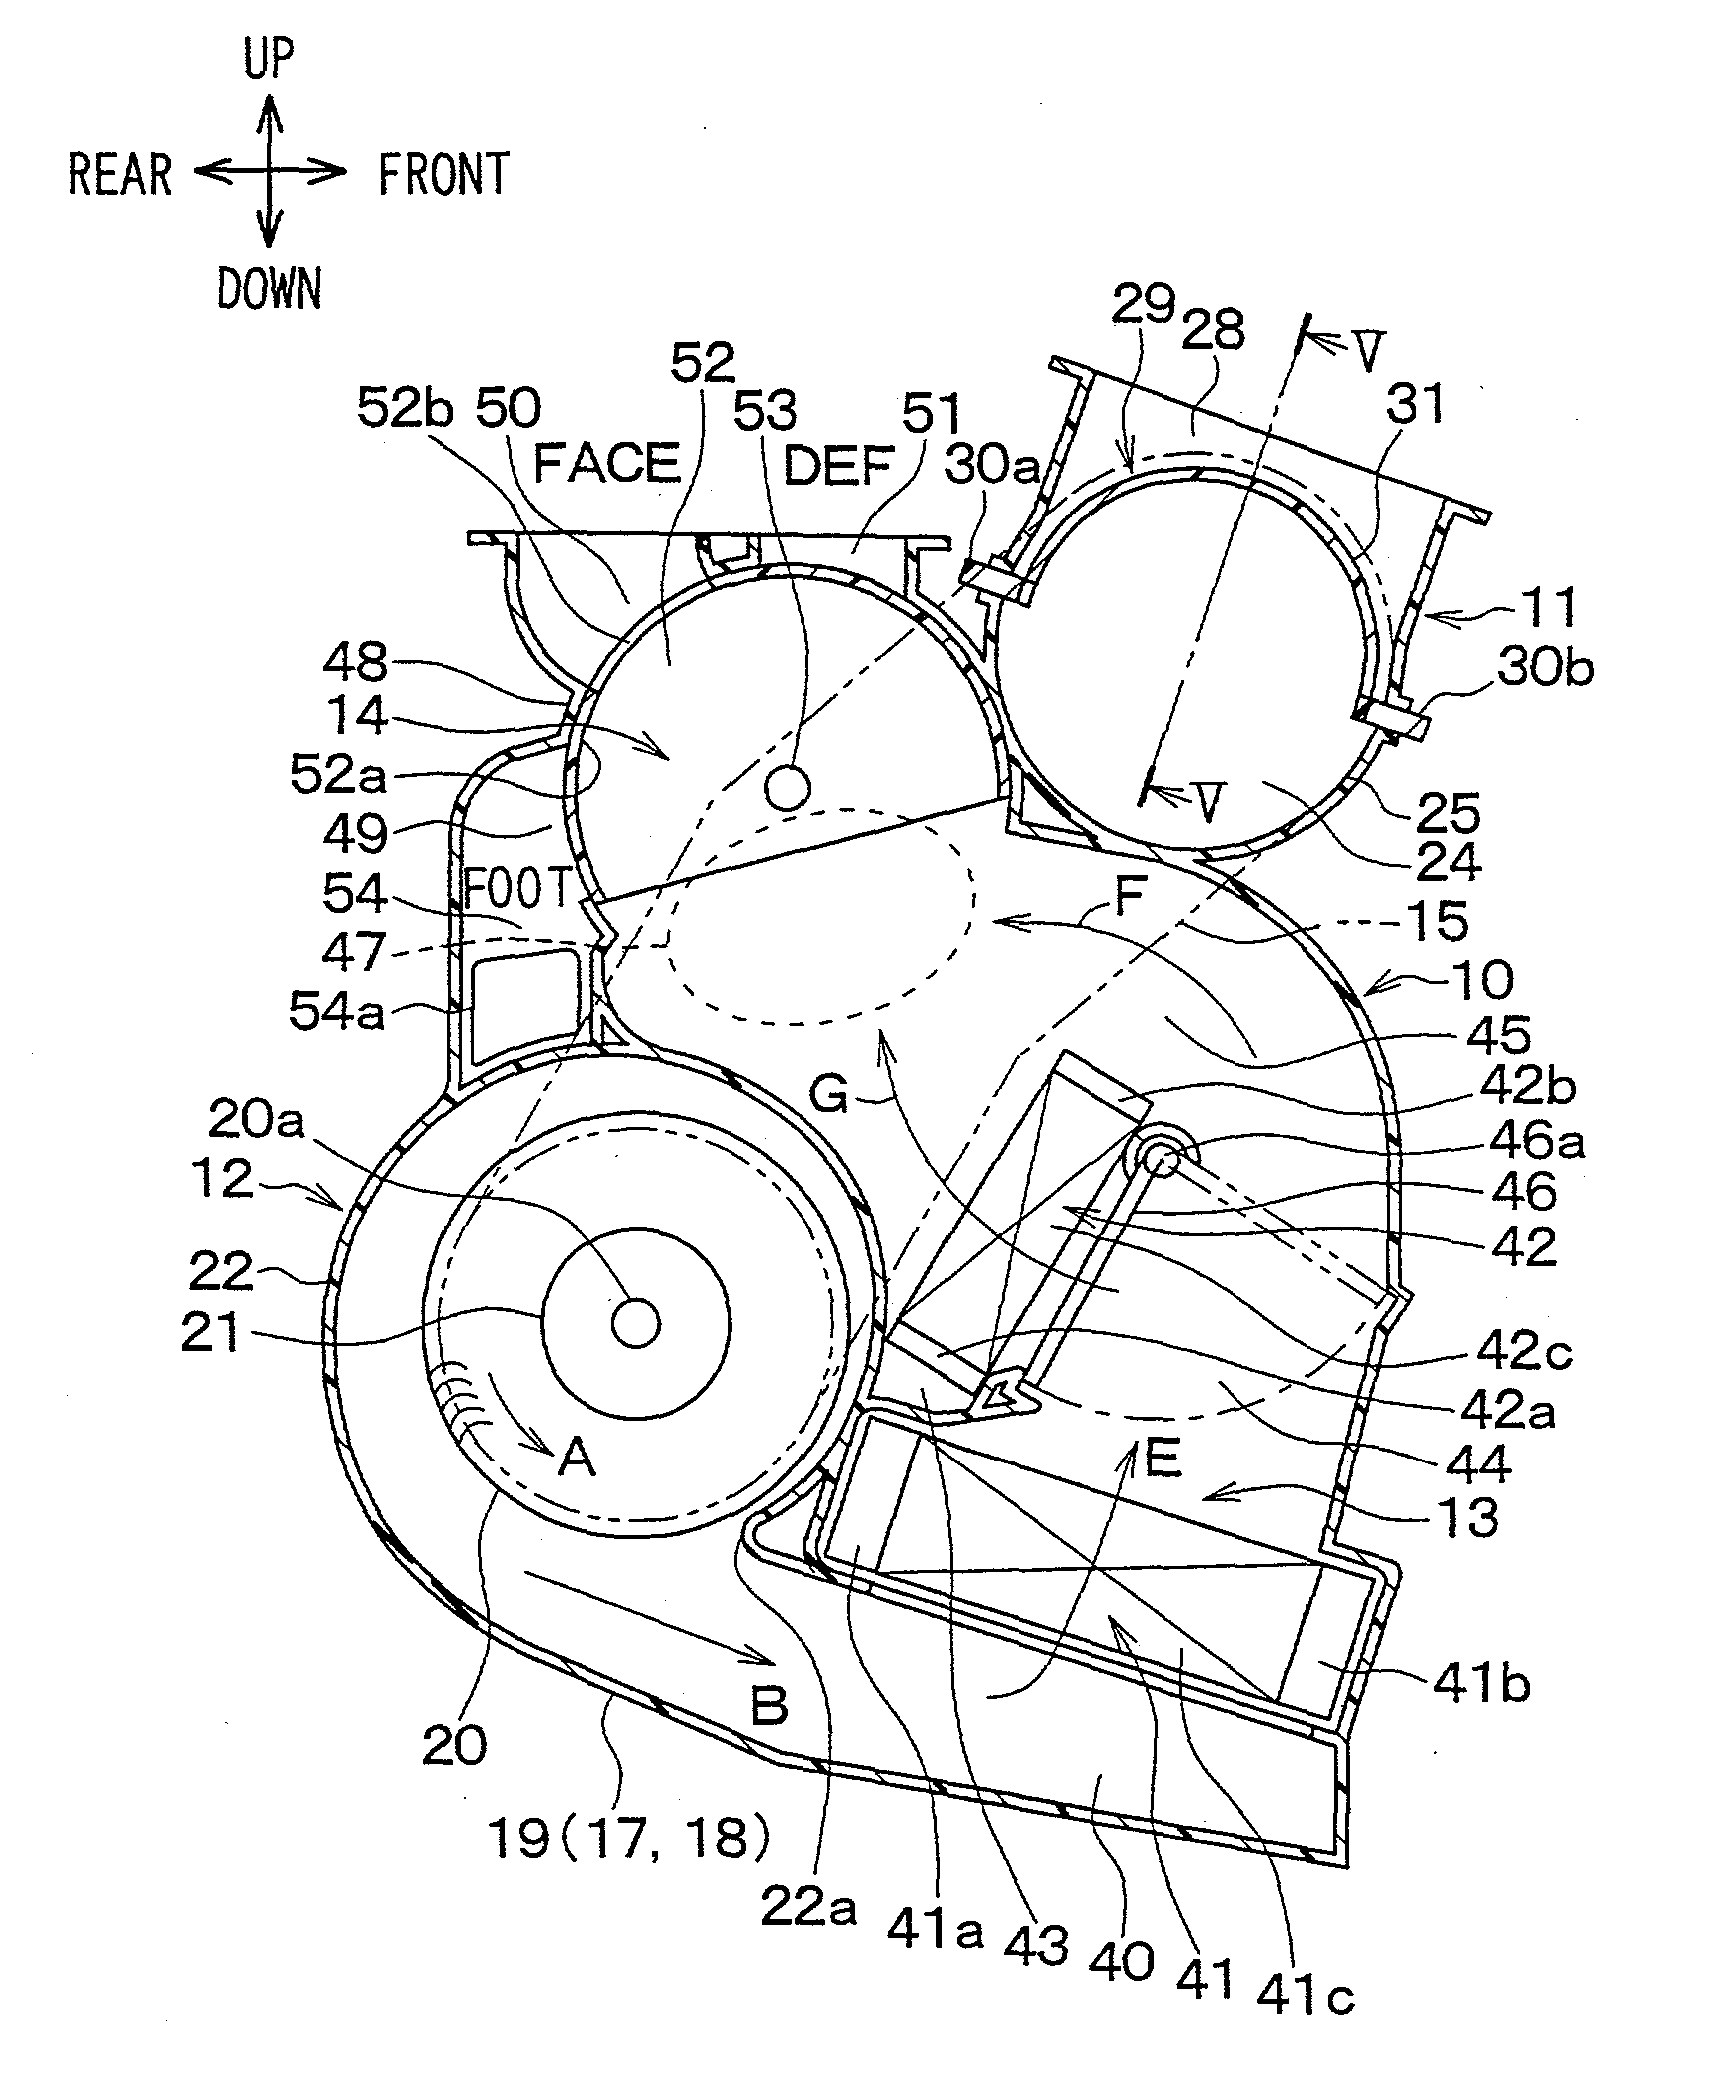 Air conditioner for vehicles with right steering wheel and left steering wheel